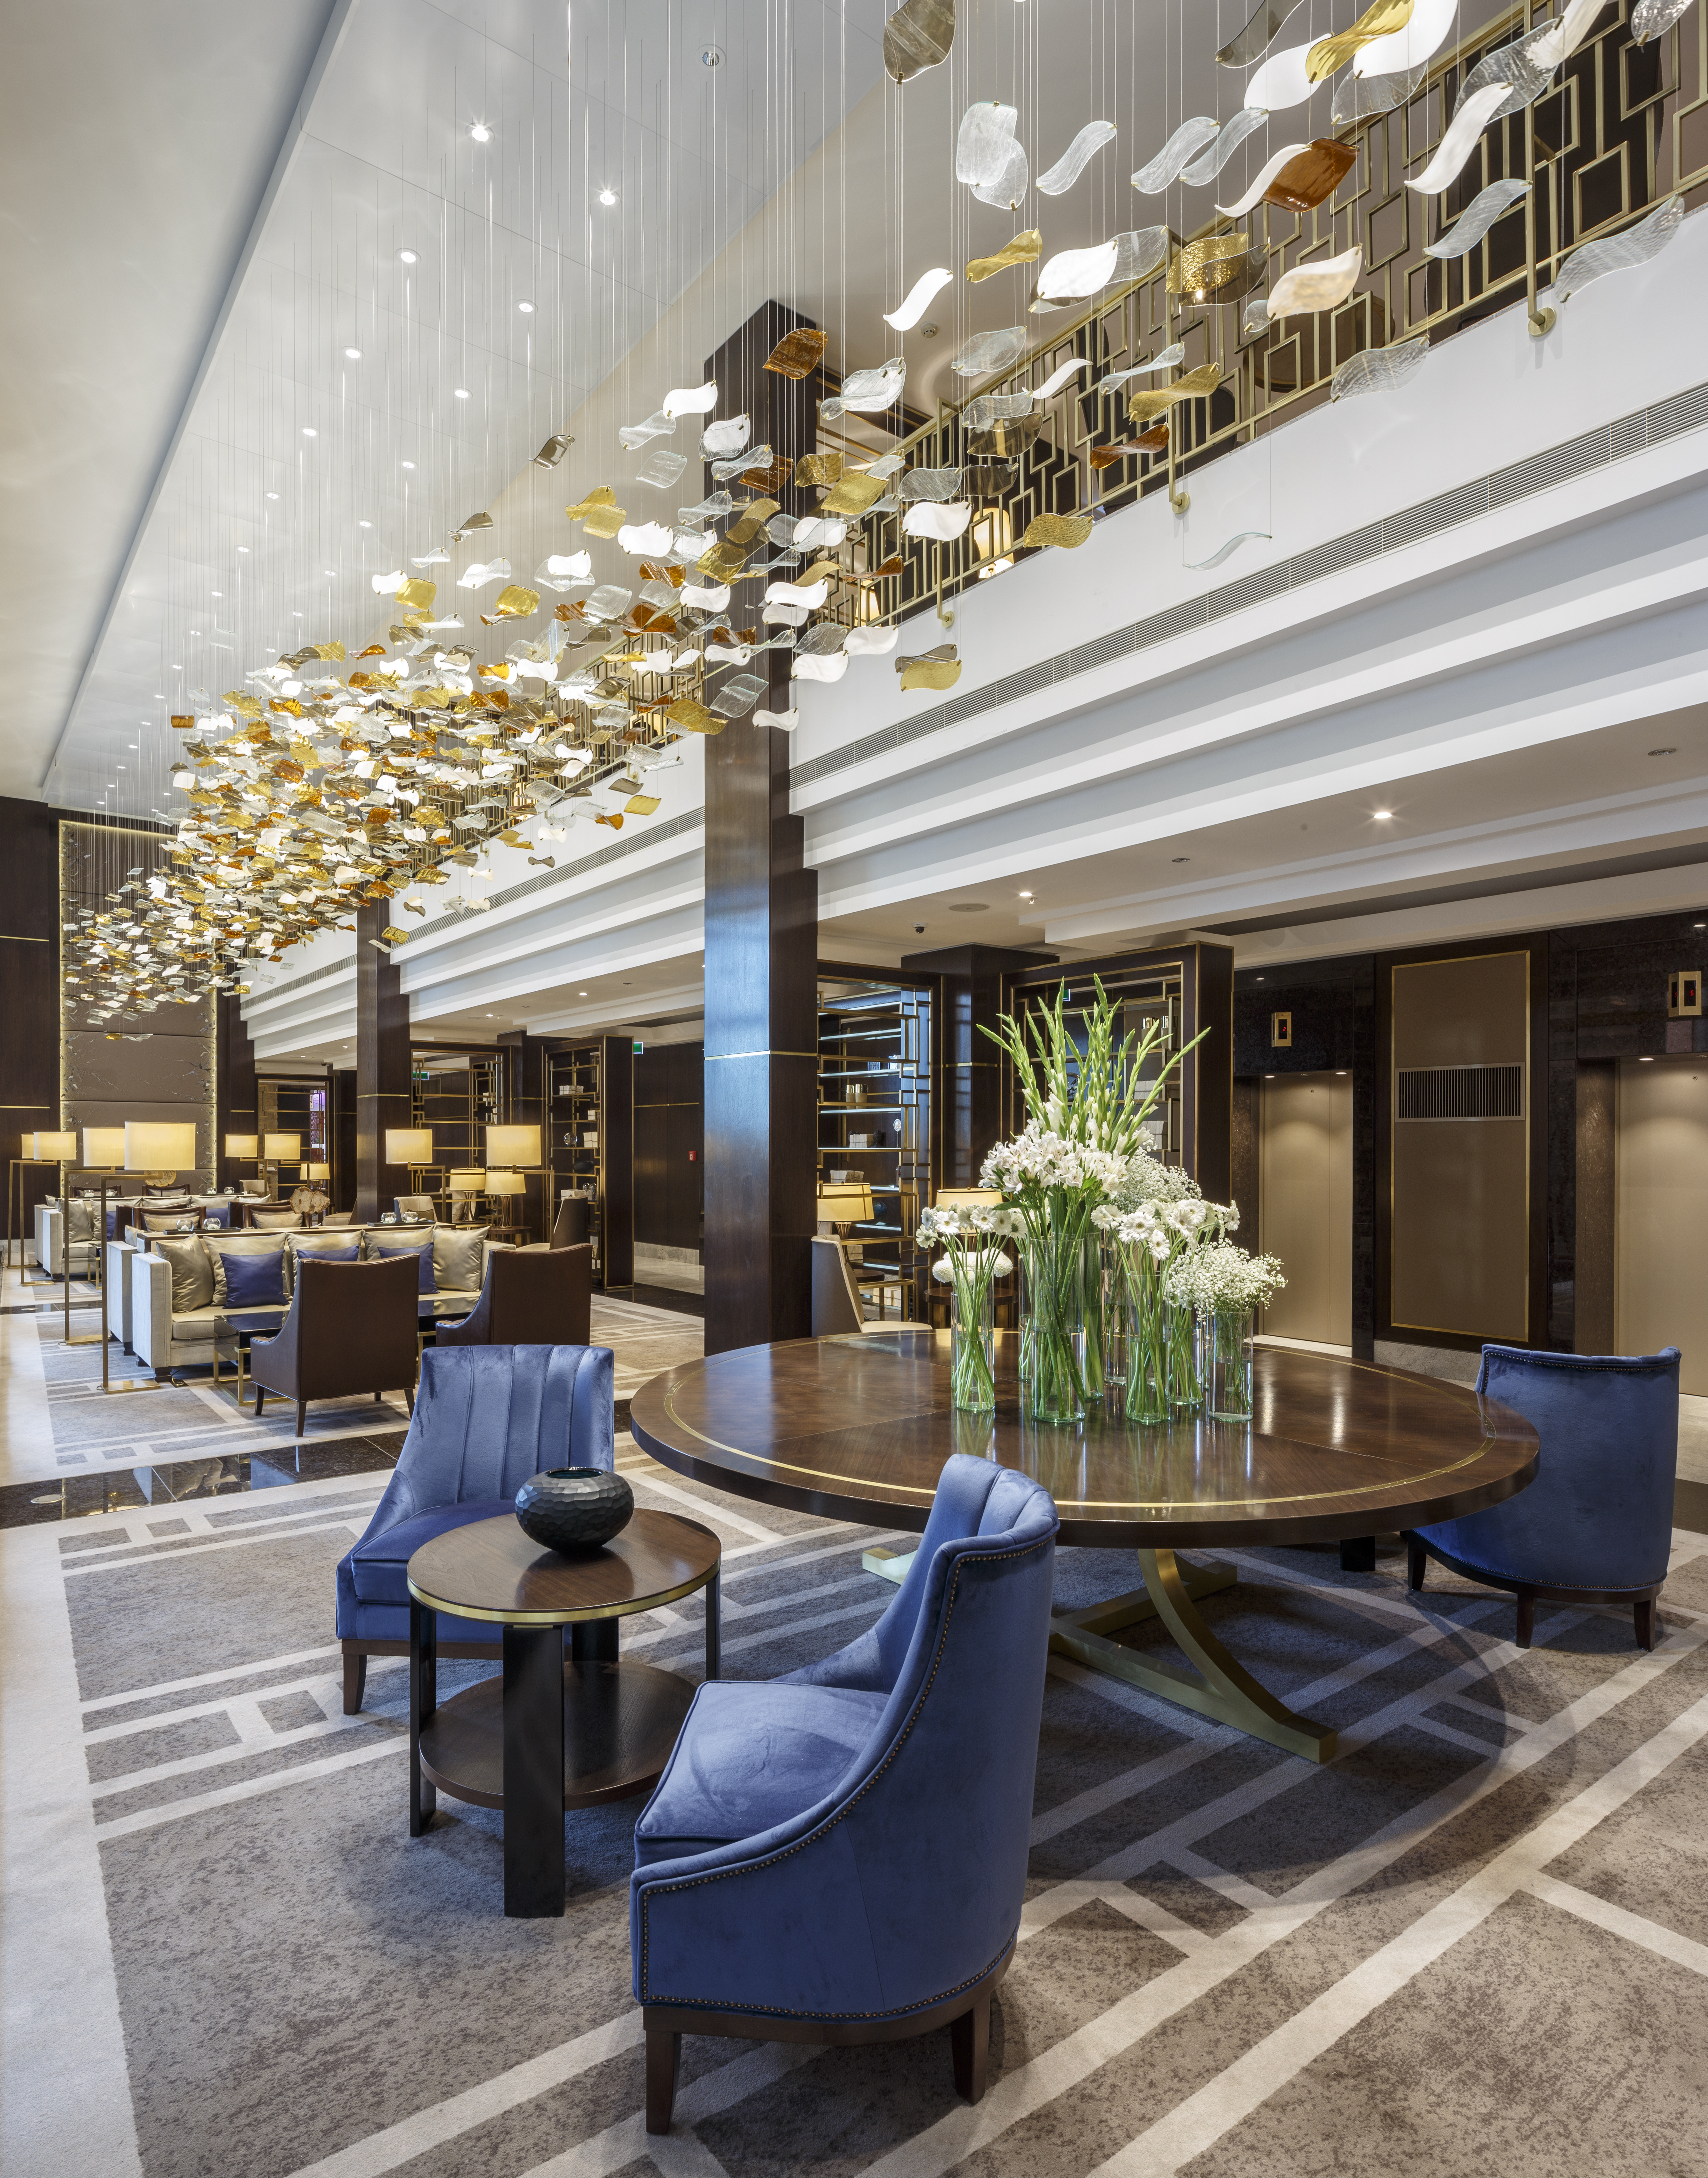 The stunning, double-height Lounge on the hotel's ground floor